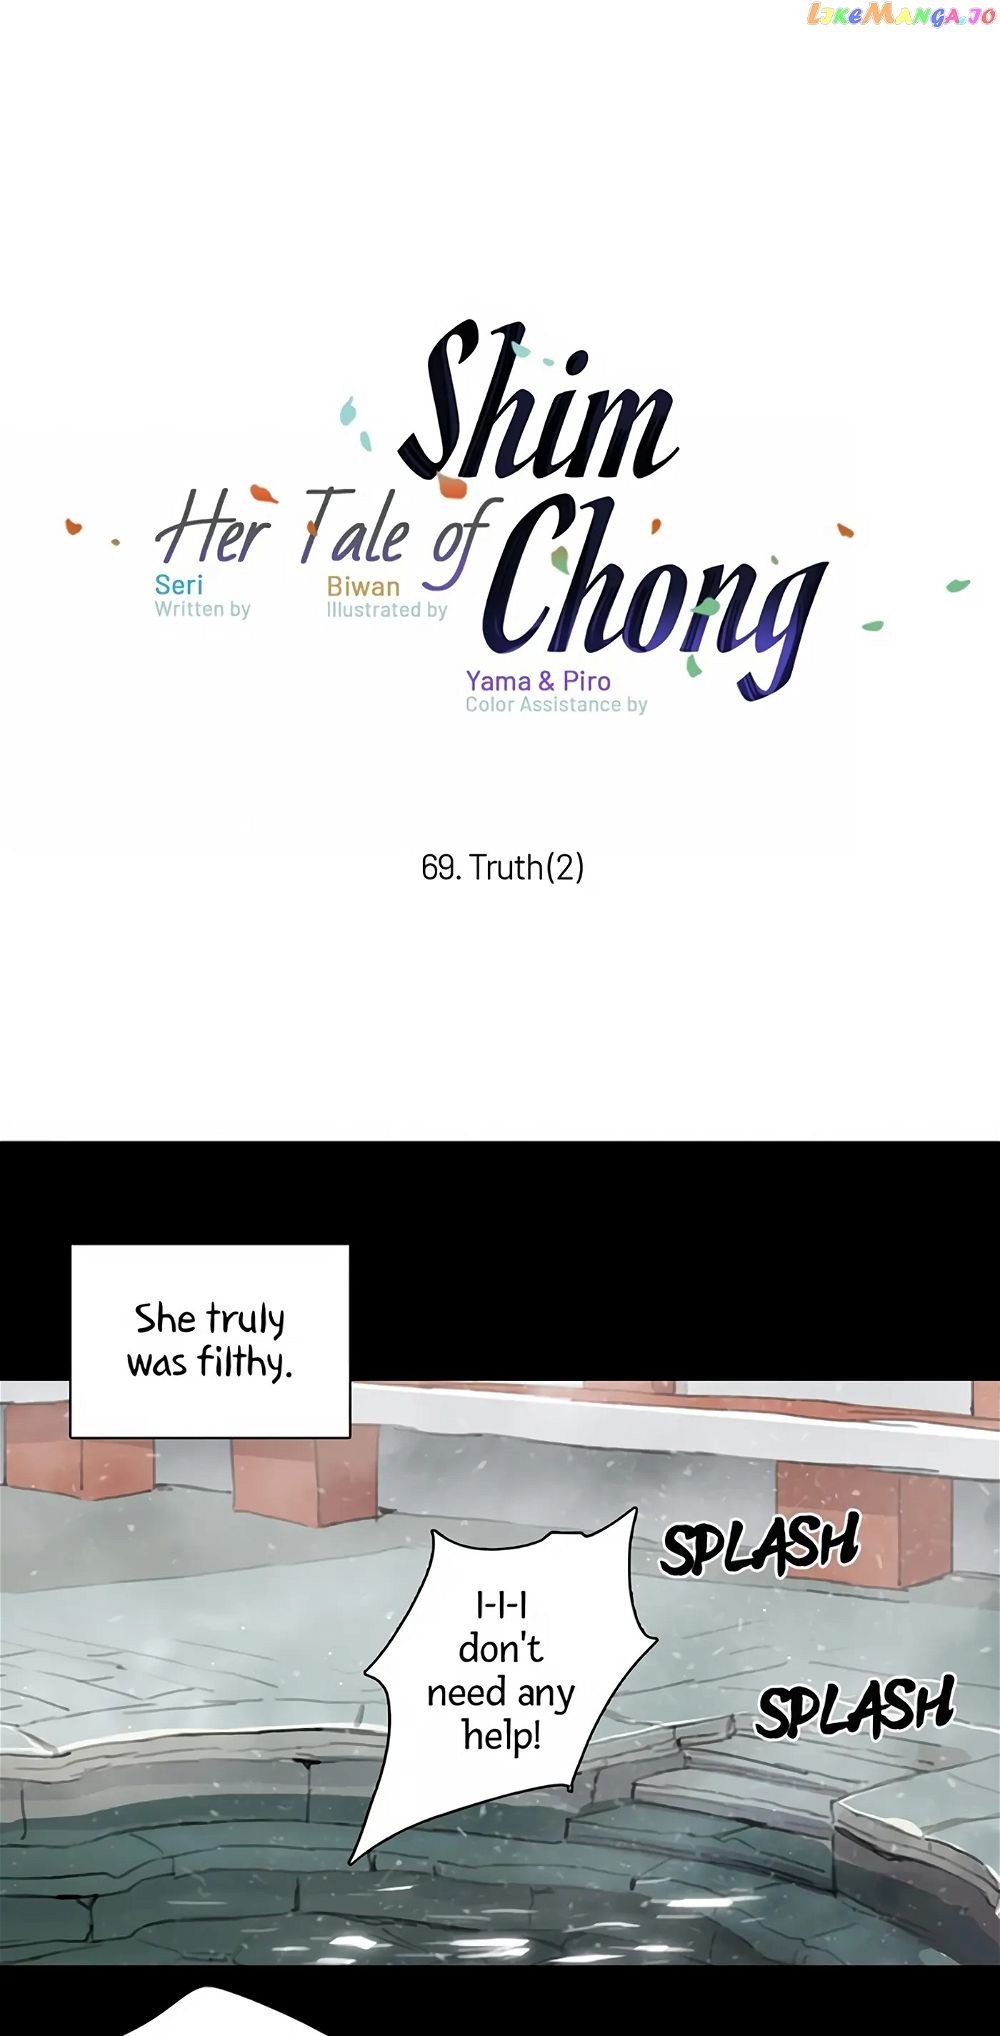 Her Tale of Shim Chong Chapter 69 - Page 1